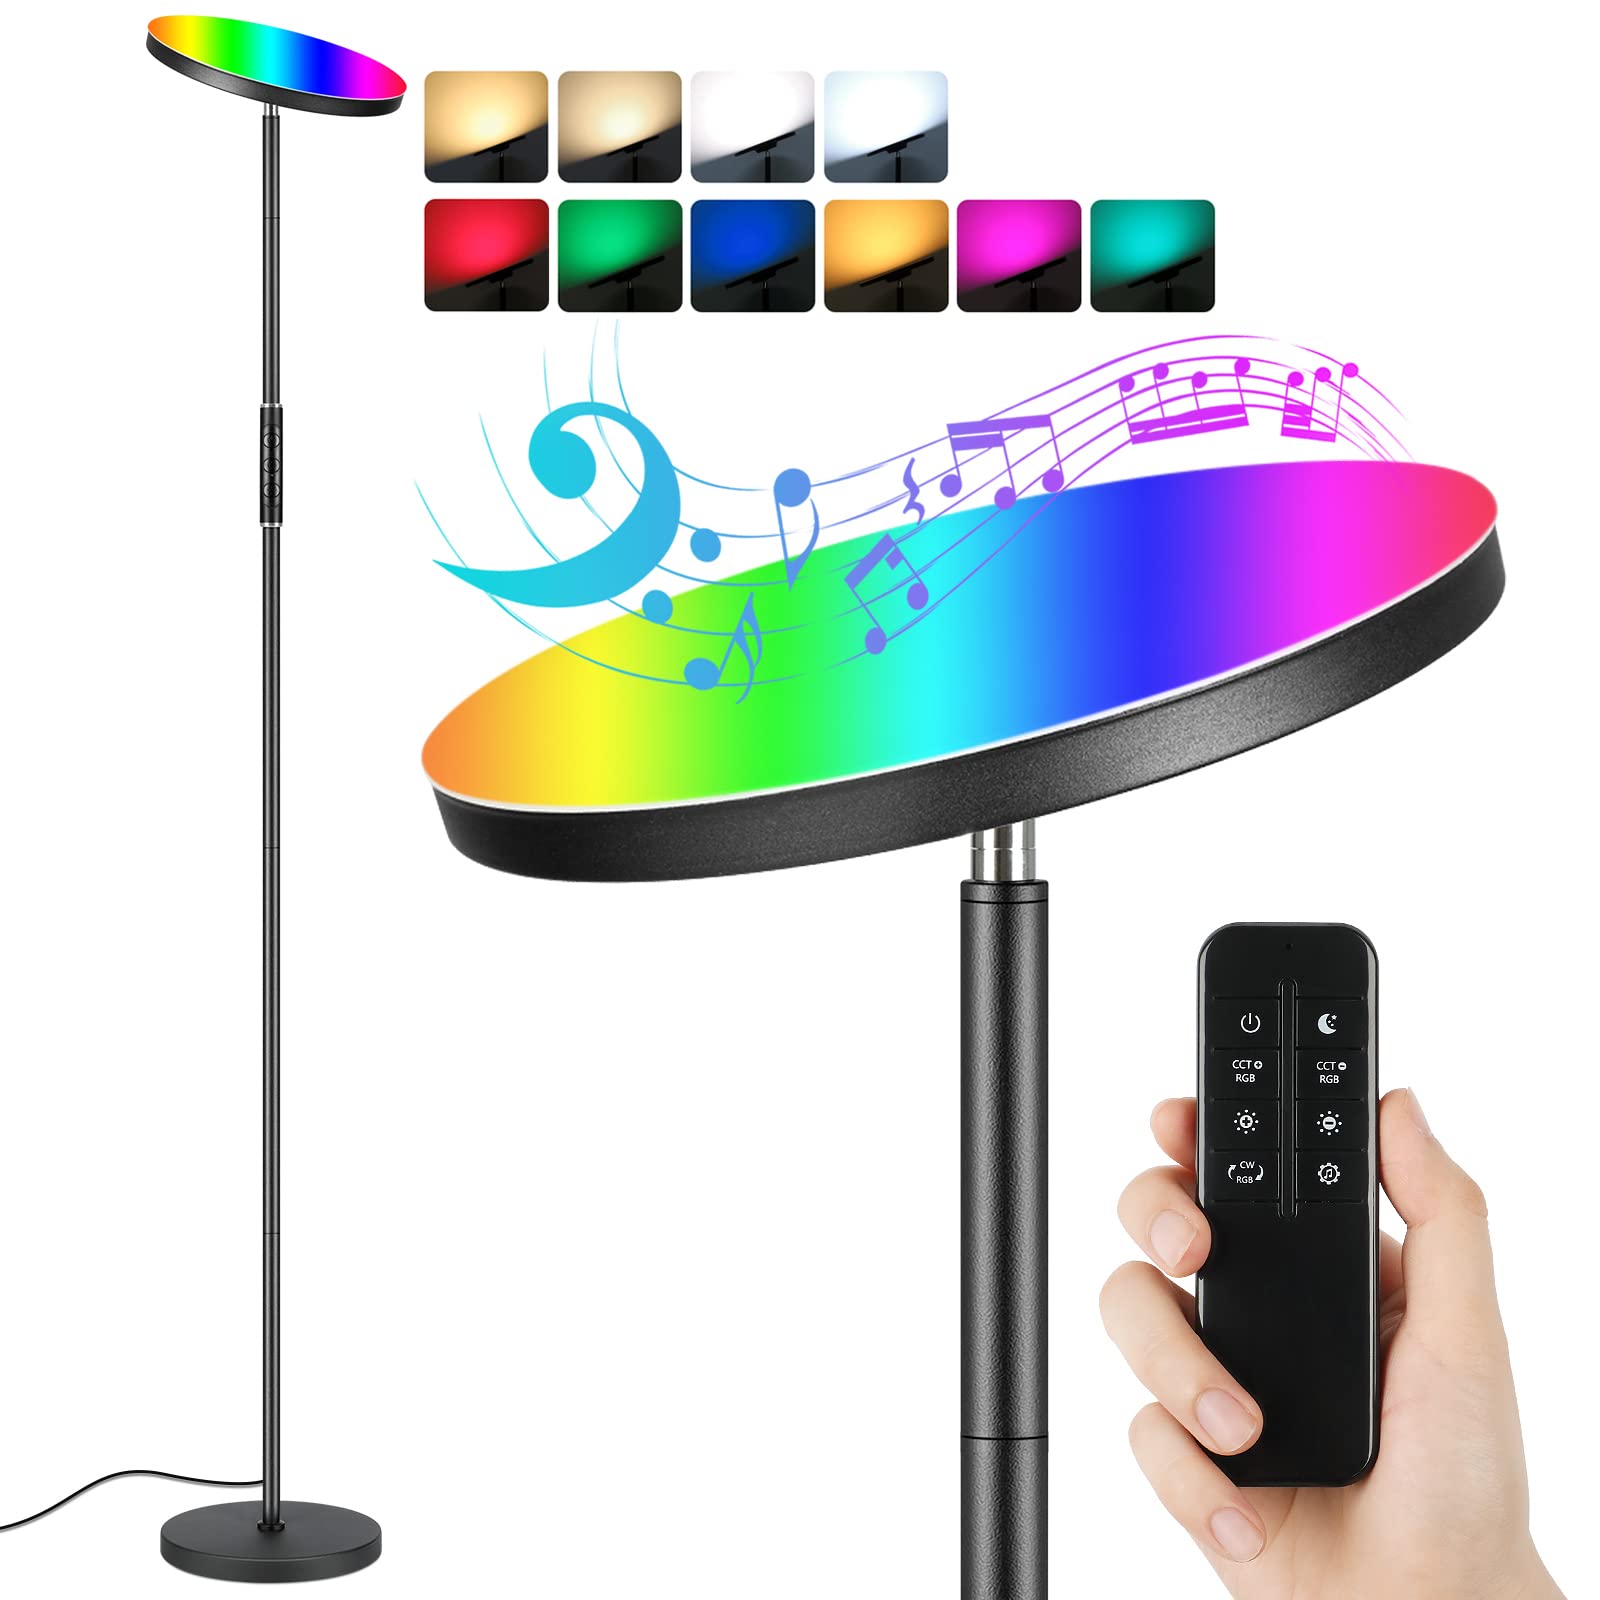 Smart LED Floor Lamp Remote Control, Super Bright Tall Standing Lamp, Touch Dimmable Torchiere Black Floor Lamp Color Changing, RGBCW Slim Uplight ...